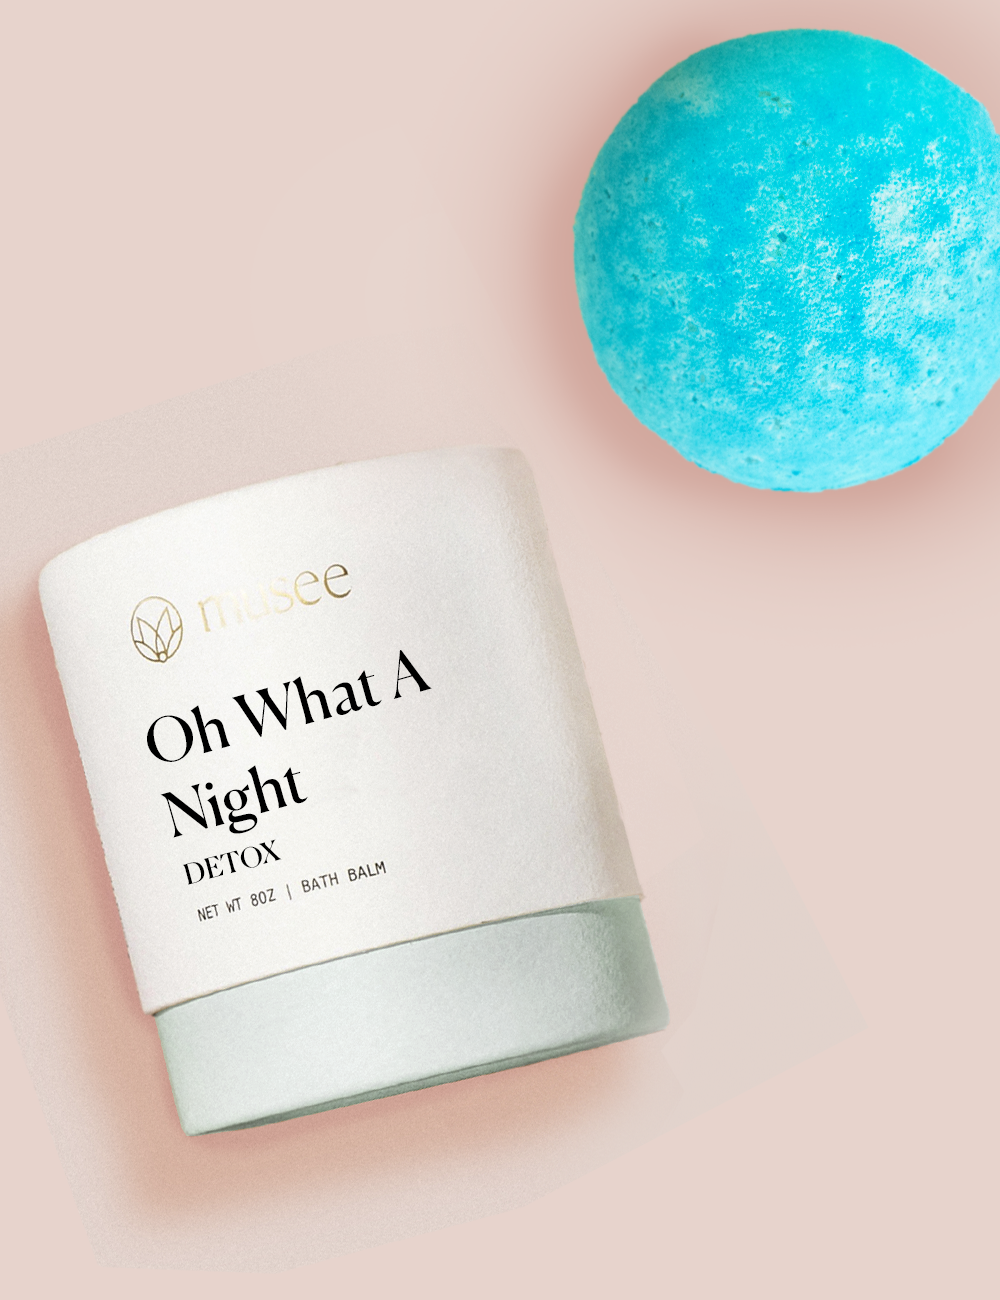 Musee Therapy Bath Balm Detox - Oh What a Night